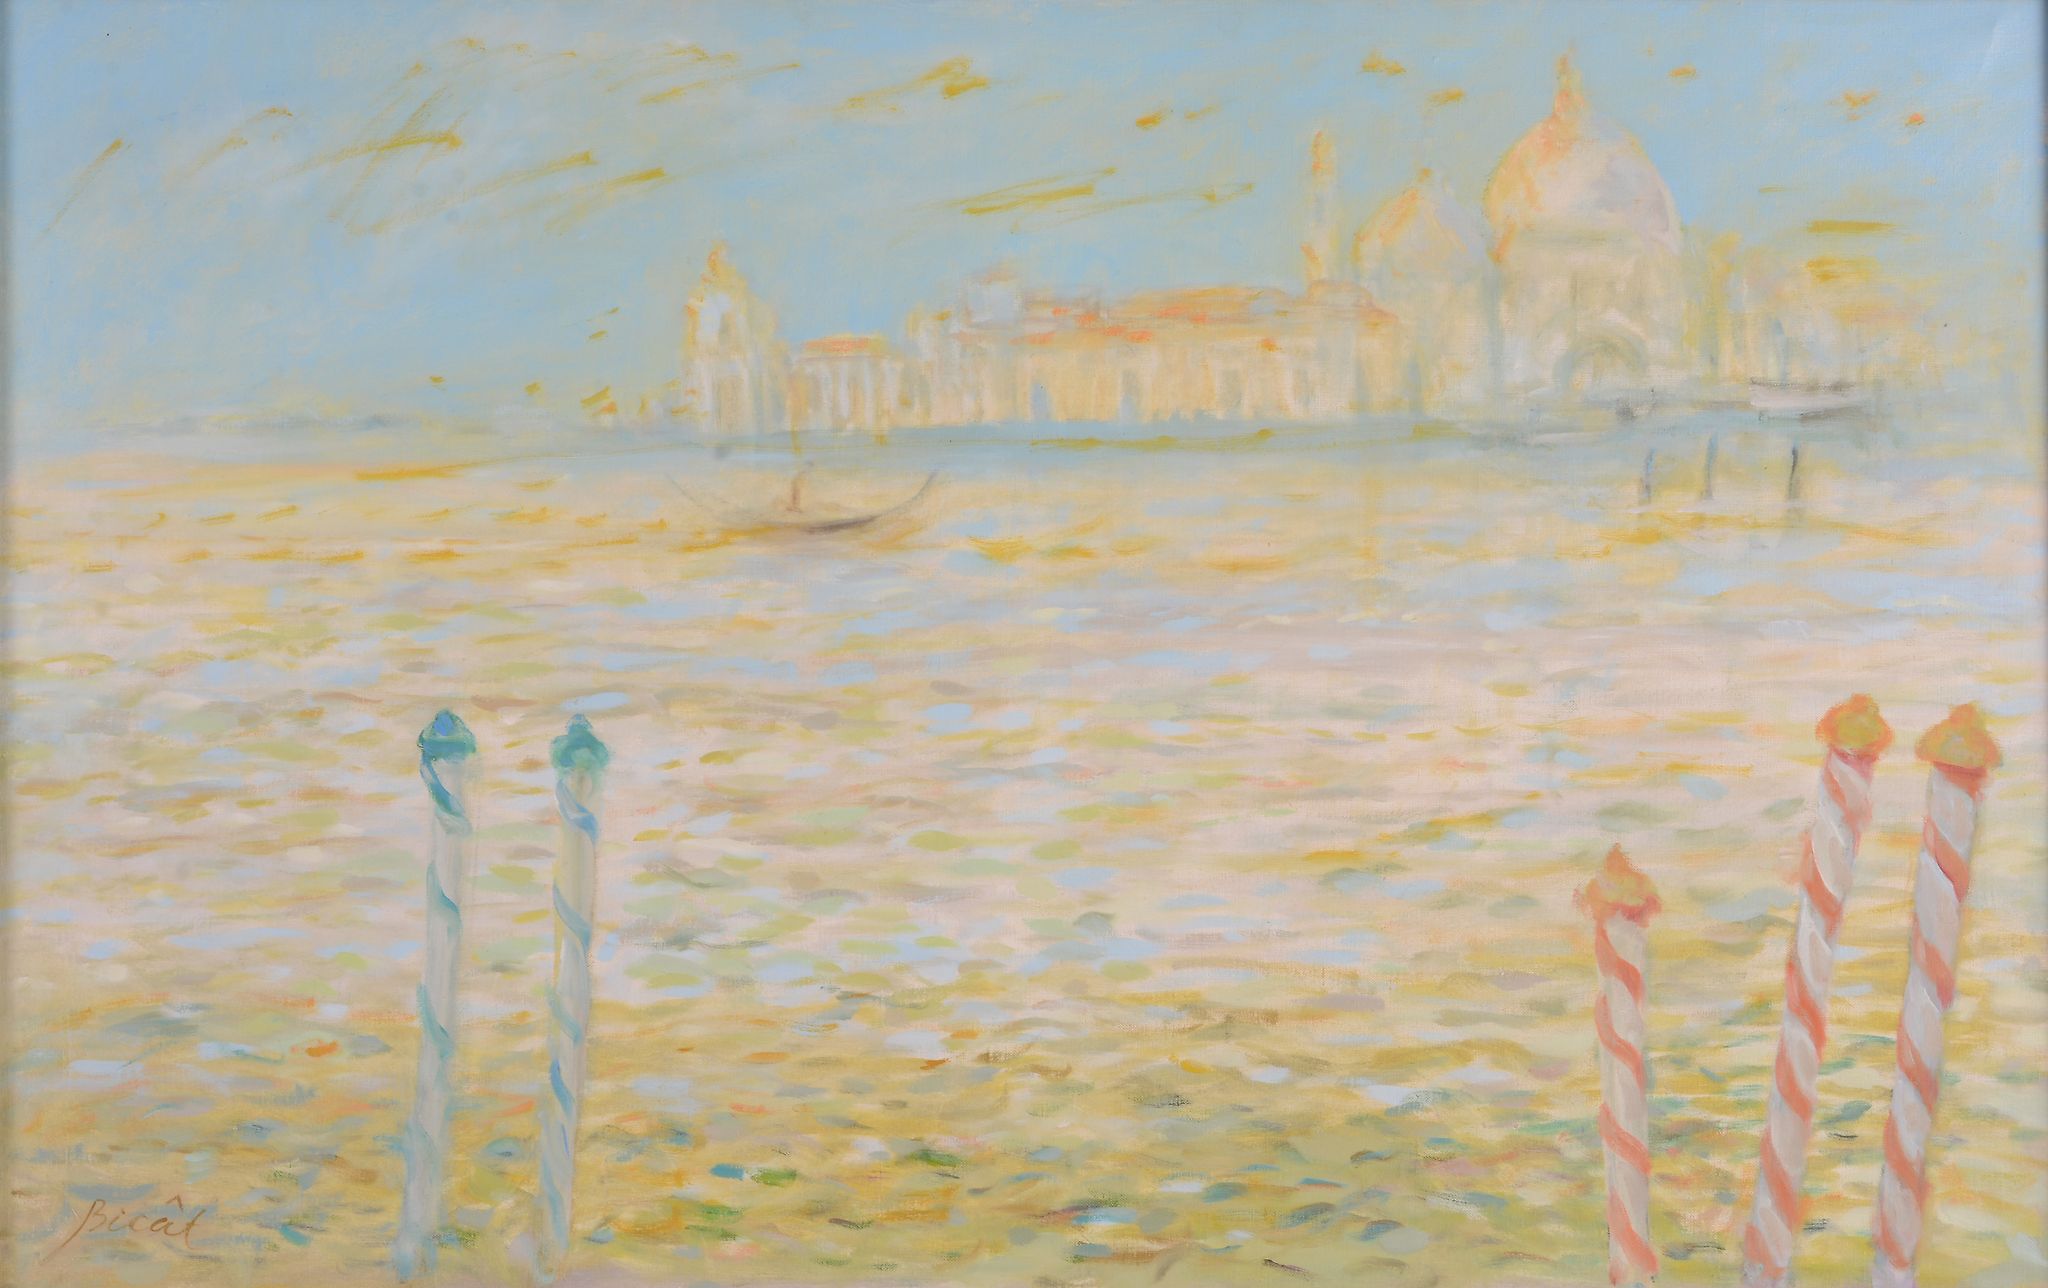 Andre Bicat (1909-1996) - Dogana, Venice Oil on canvas Signed lower left 76 x 121.5 cm. (30 x 48 in)